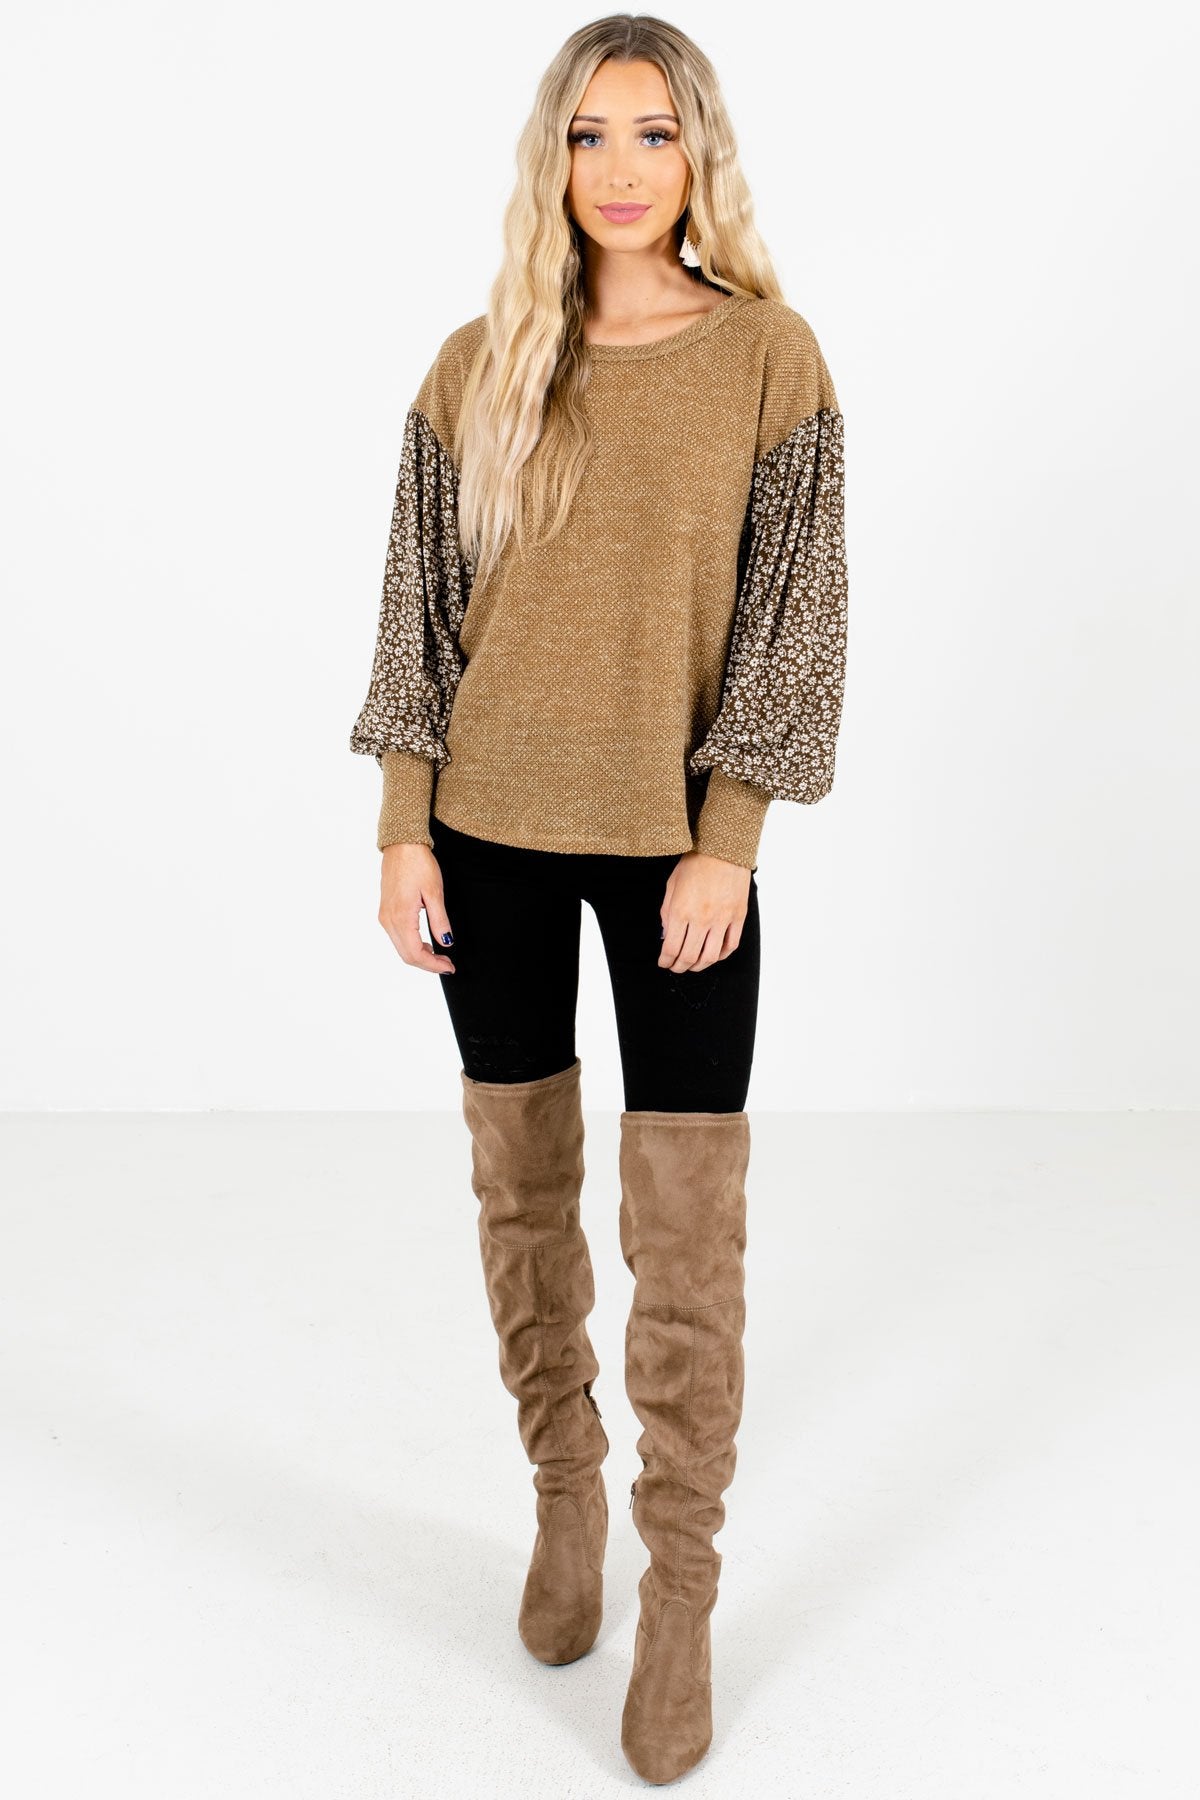 Women’s Olive Fall and Winter Boutique Clothing